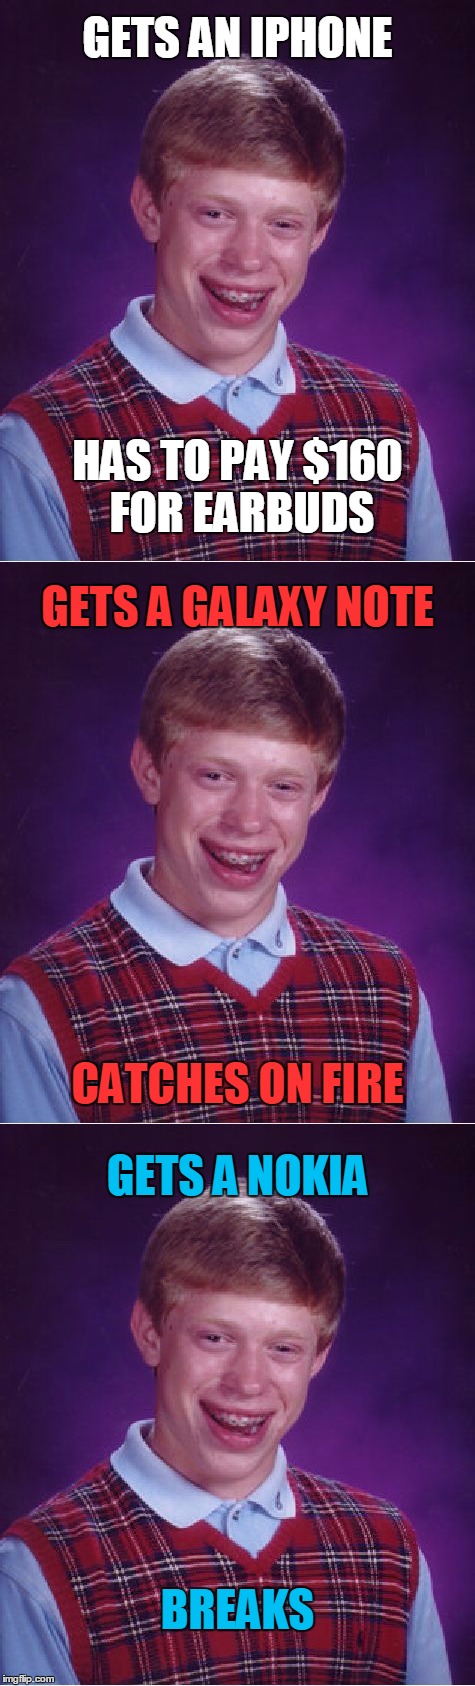 Bad Luck Brian | GETS AN IPHONE; HAS TO PAY $160 FOR EARBUDS; GETS A GALAXY NOTE; CATCHES ON FIRE; GETS A NOKIA; BREAKS | image tagged in memes,bad luck brian,trhtimmy,cellphones,that moment when you're tryna edit your tags but it freezes | made w/ Imgflip meme maker